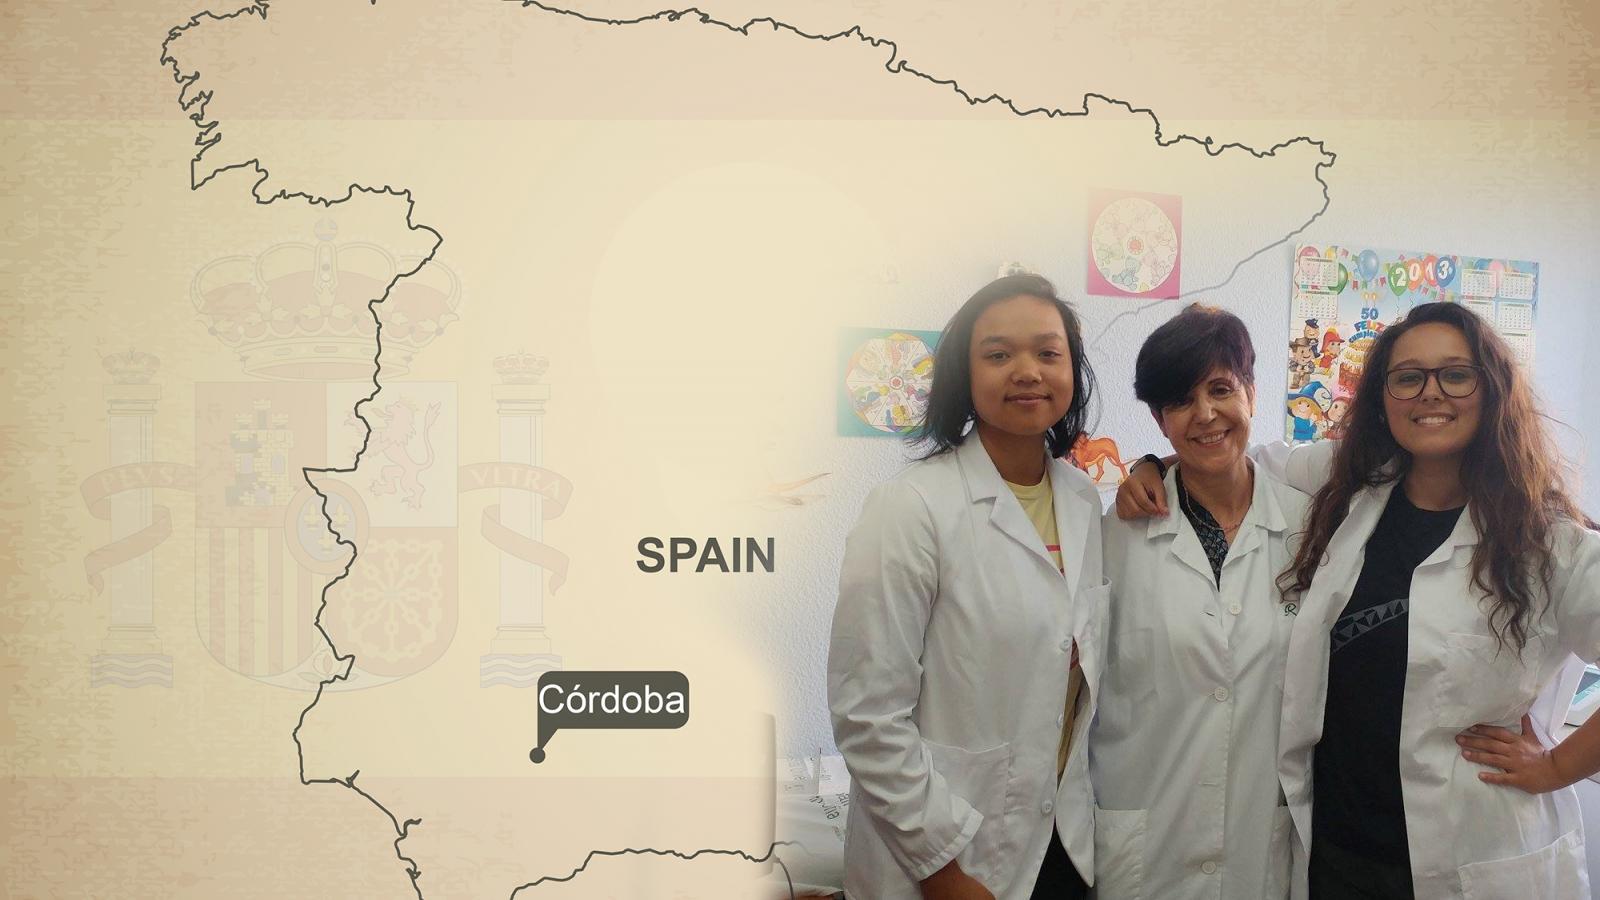 VCU School of Nursing students and scholarship recipients Amy Heng (left) and Staci Fraley (right) traveled to Cordoba, Spain, this summer. They are pictured here with their Spanish nursing instructor.